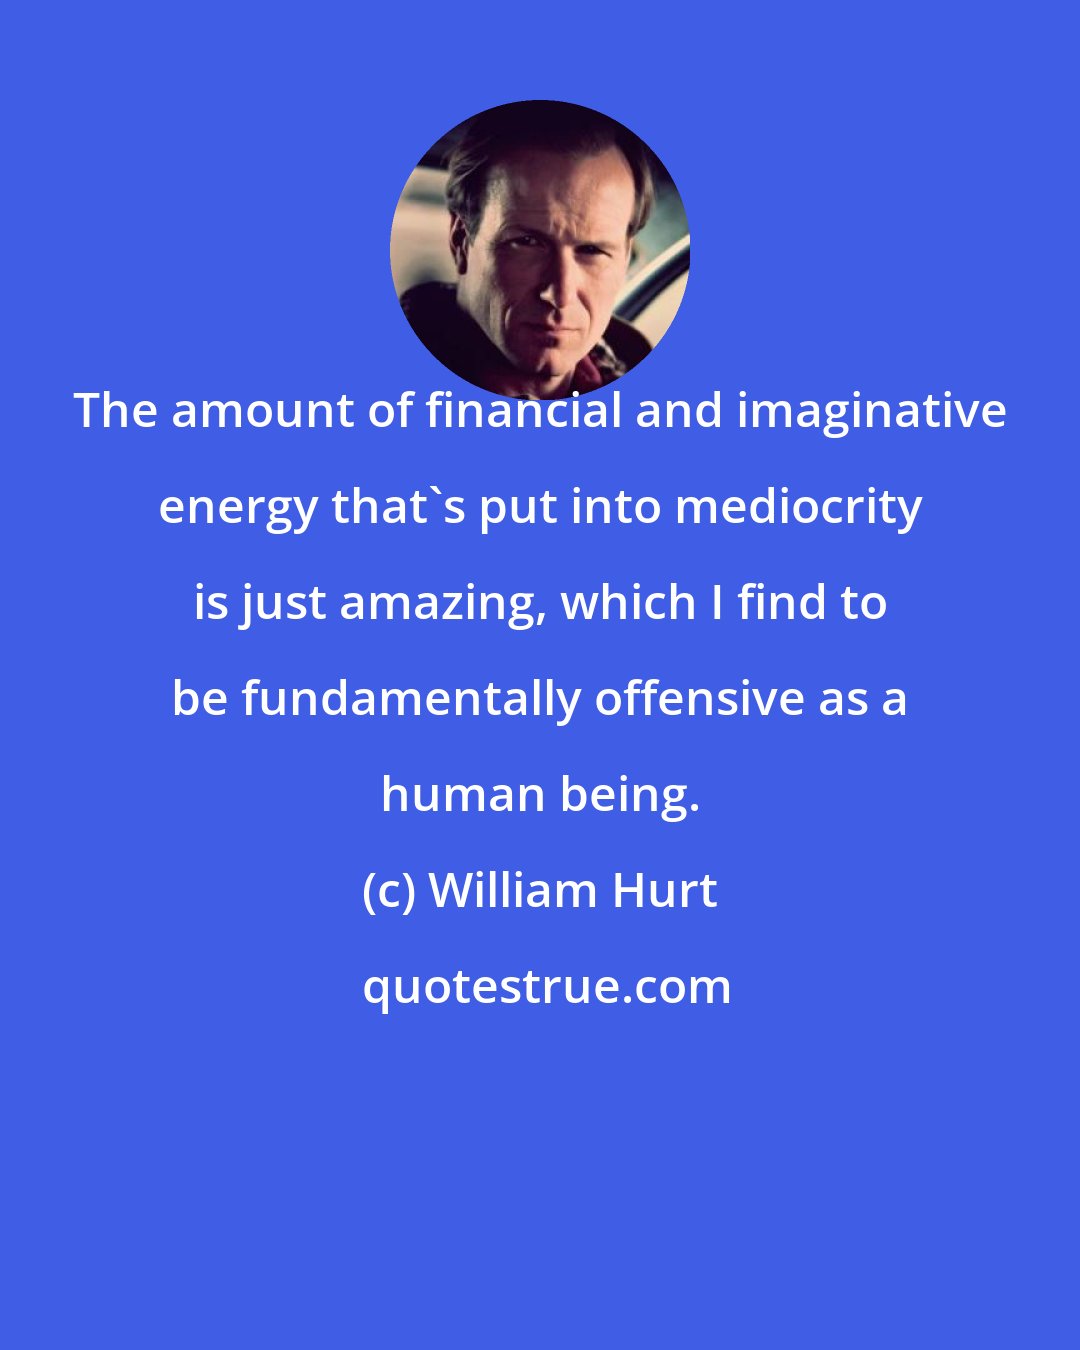 William Hurt: The amount of financial and imaginative energy that's put into mediocrity is just amazing, which I find to be fundamentally offensive as a human being.